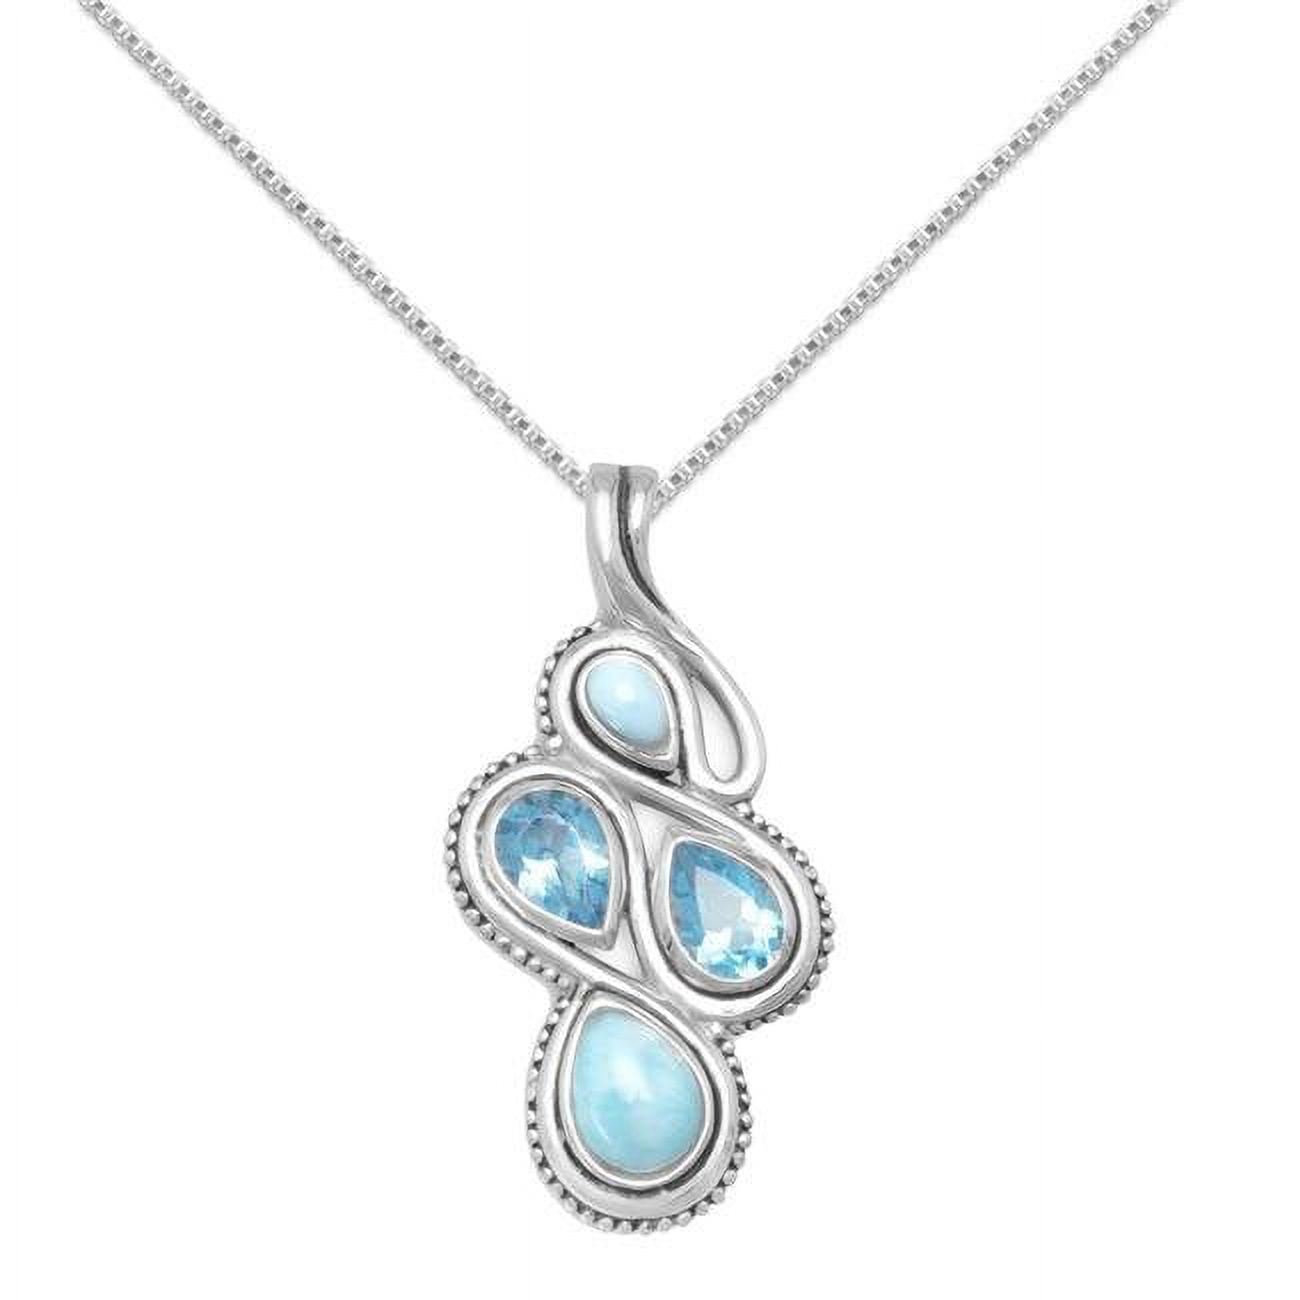 74279-16 16 In. Oxidized Sterling Silver Blue Topaz & Larimar Figure 8 Slide Pendant With 1.5 Mm Box Chain